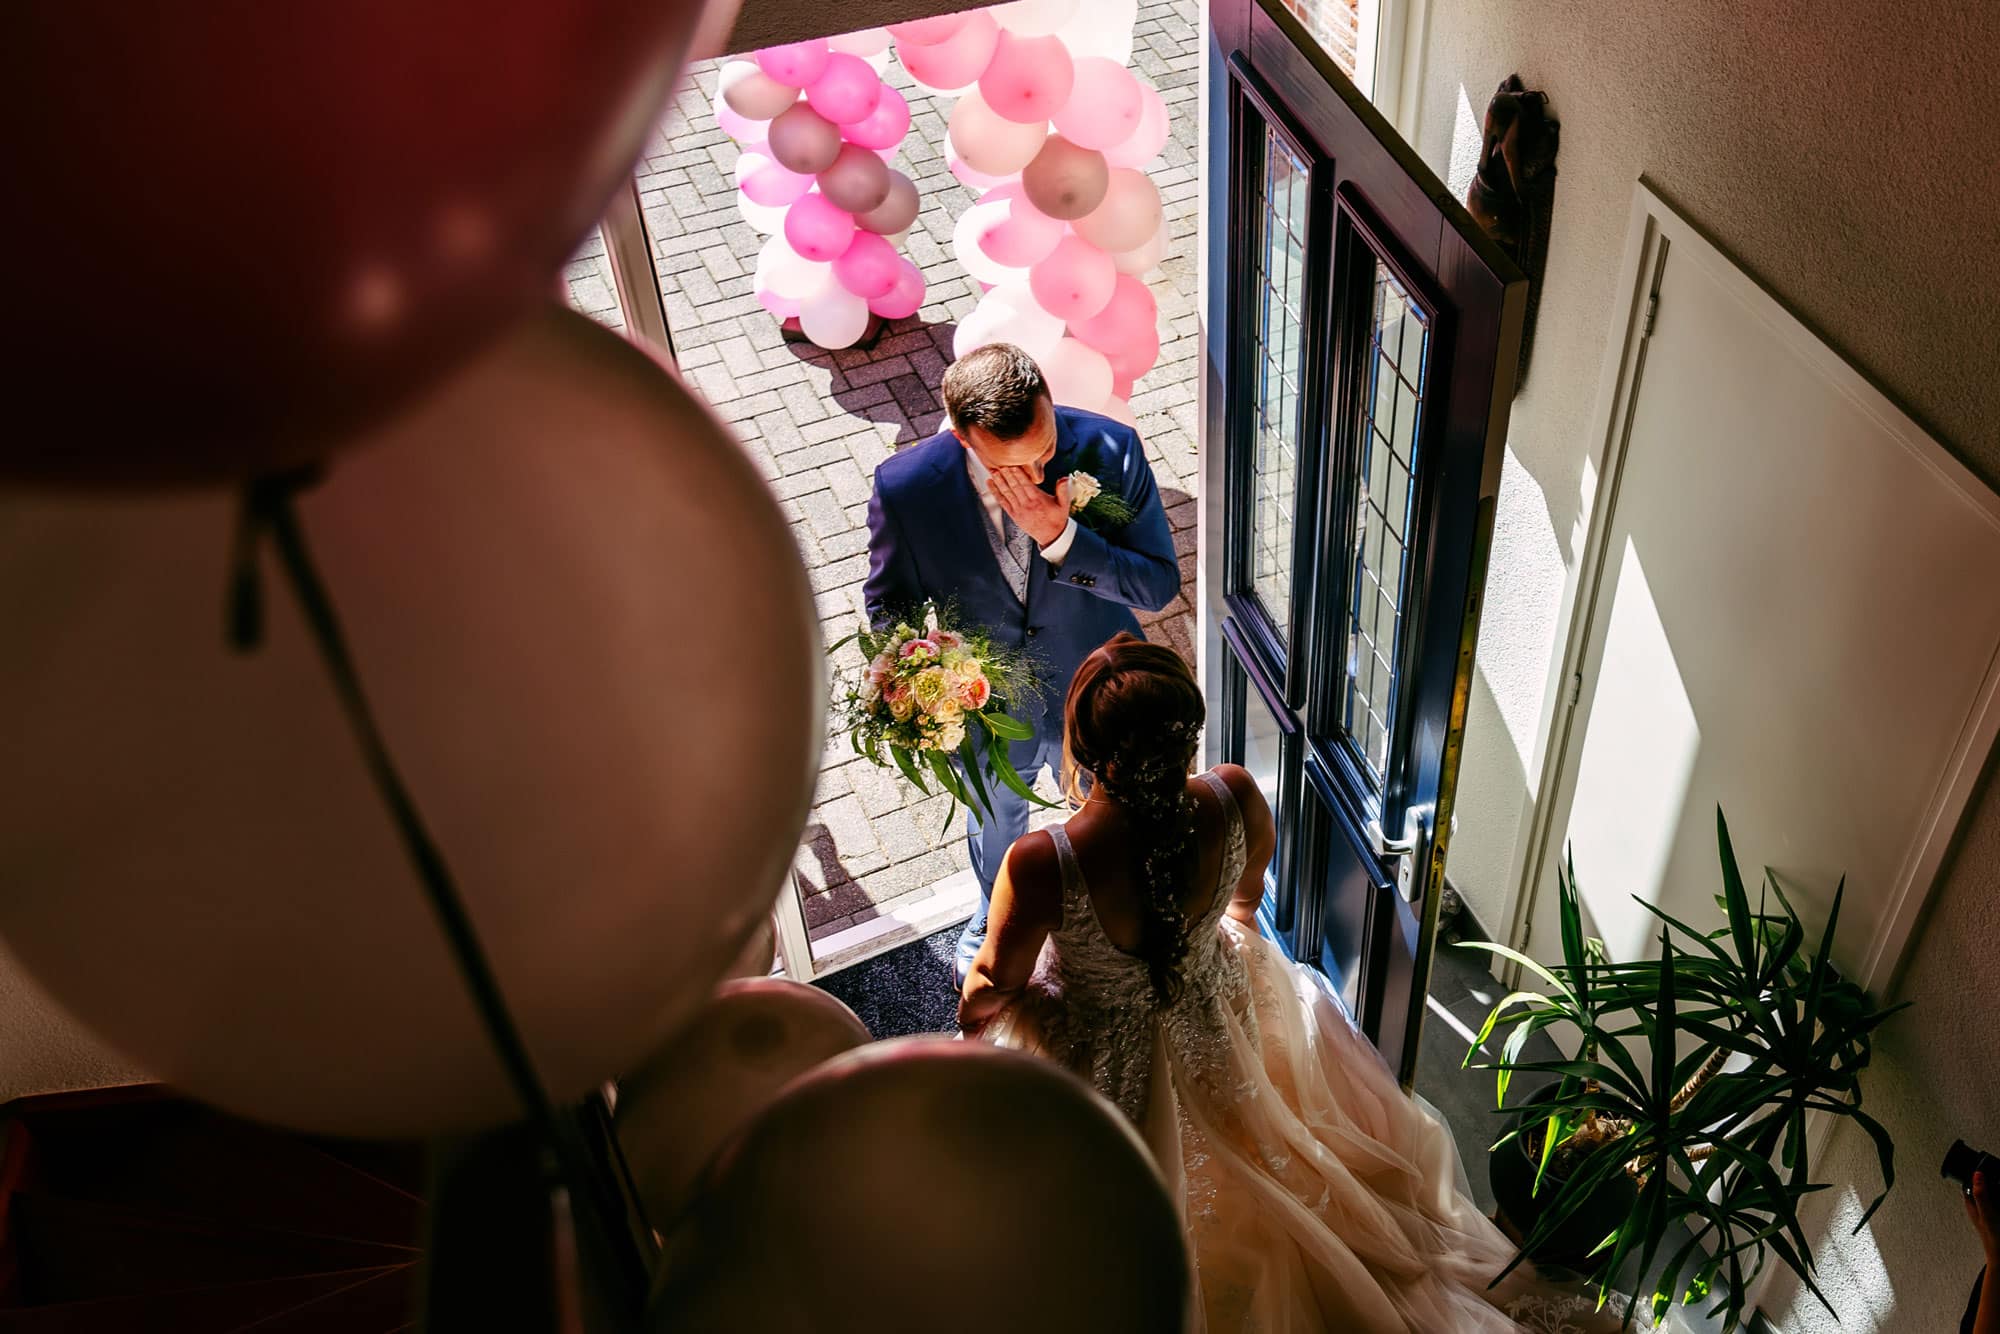 A bride and groom stand in front of balloons.